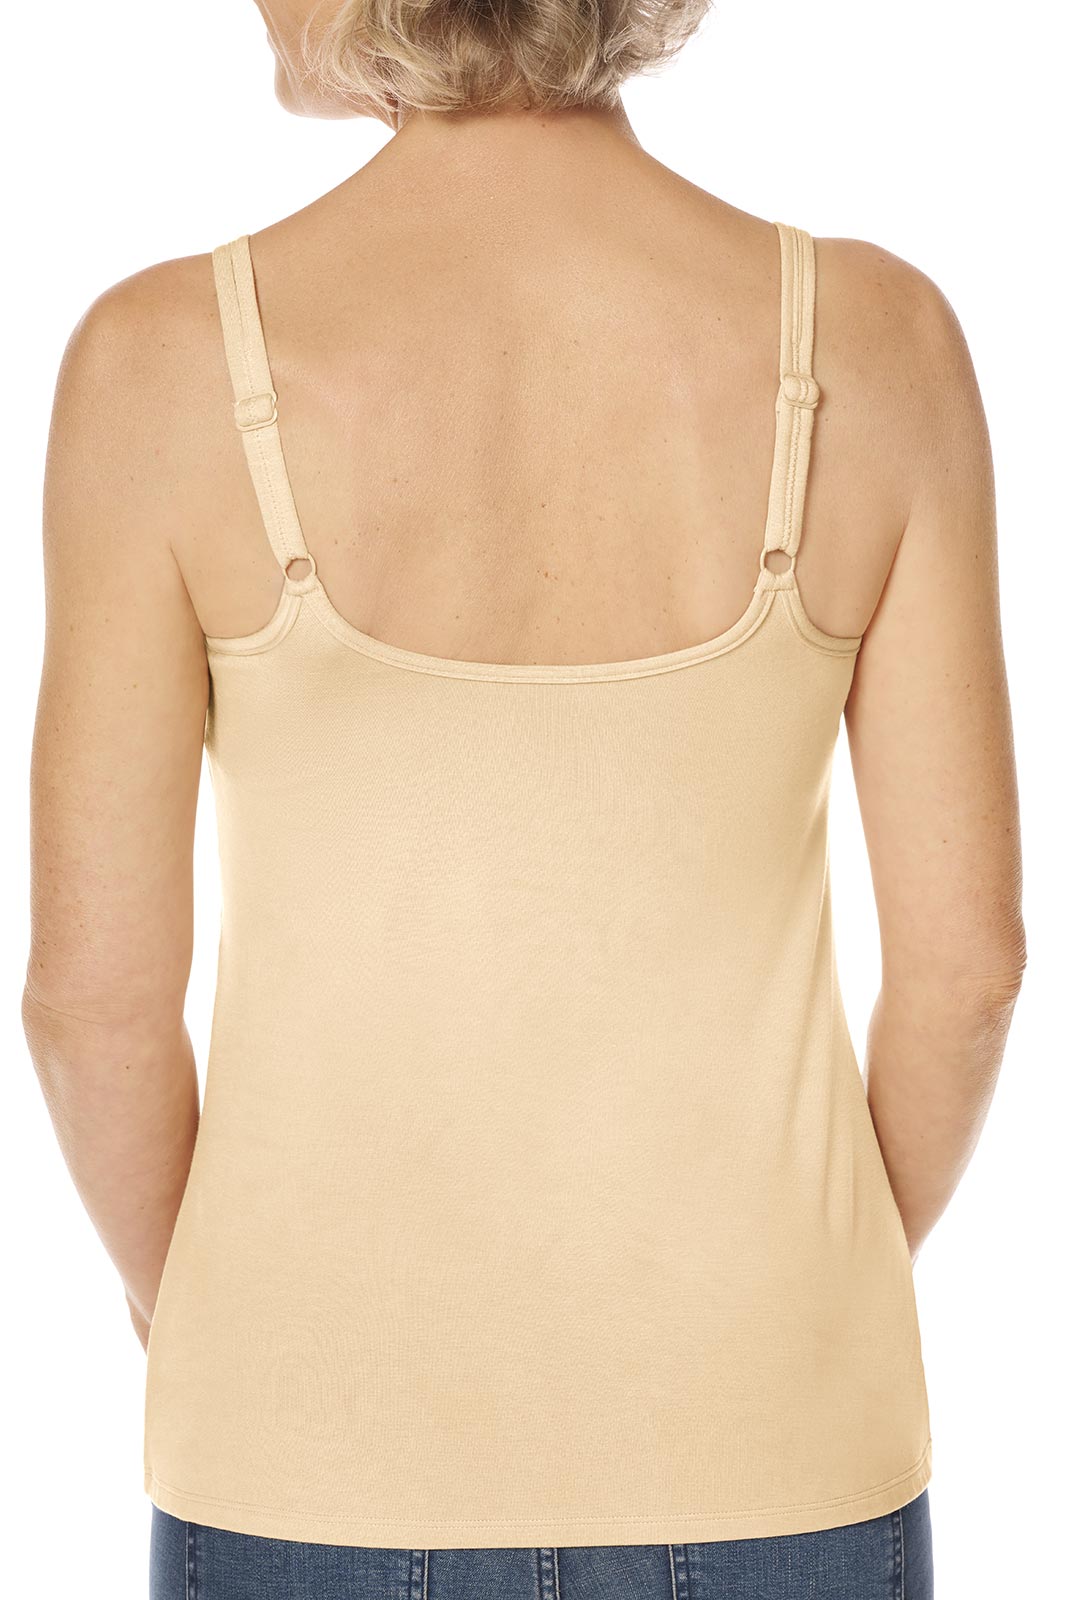 Amoena UK - Our popular Valletta top is available in two